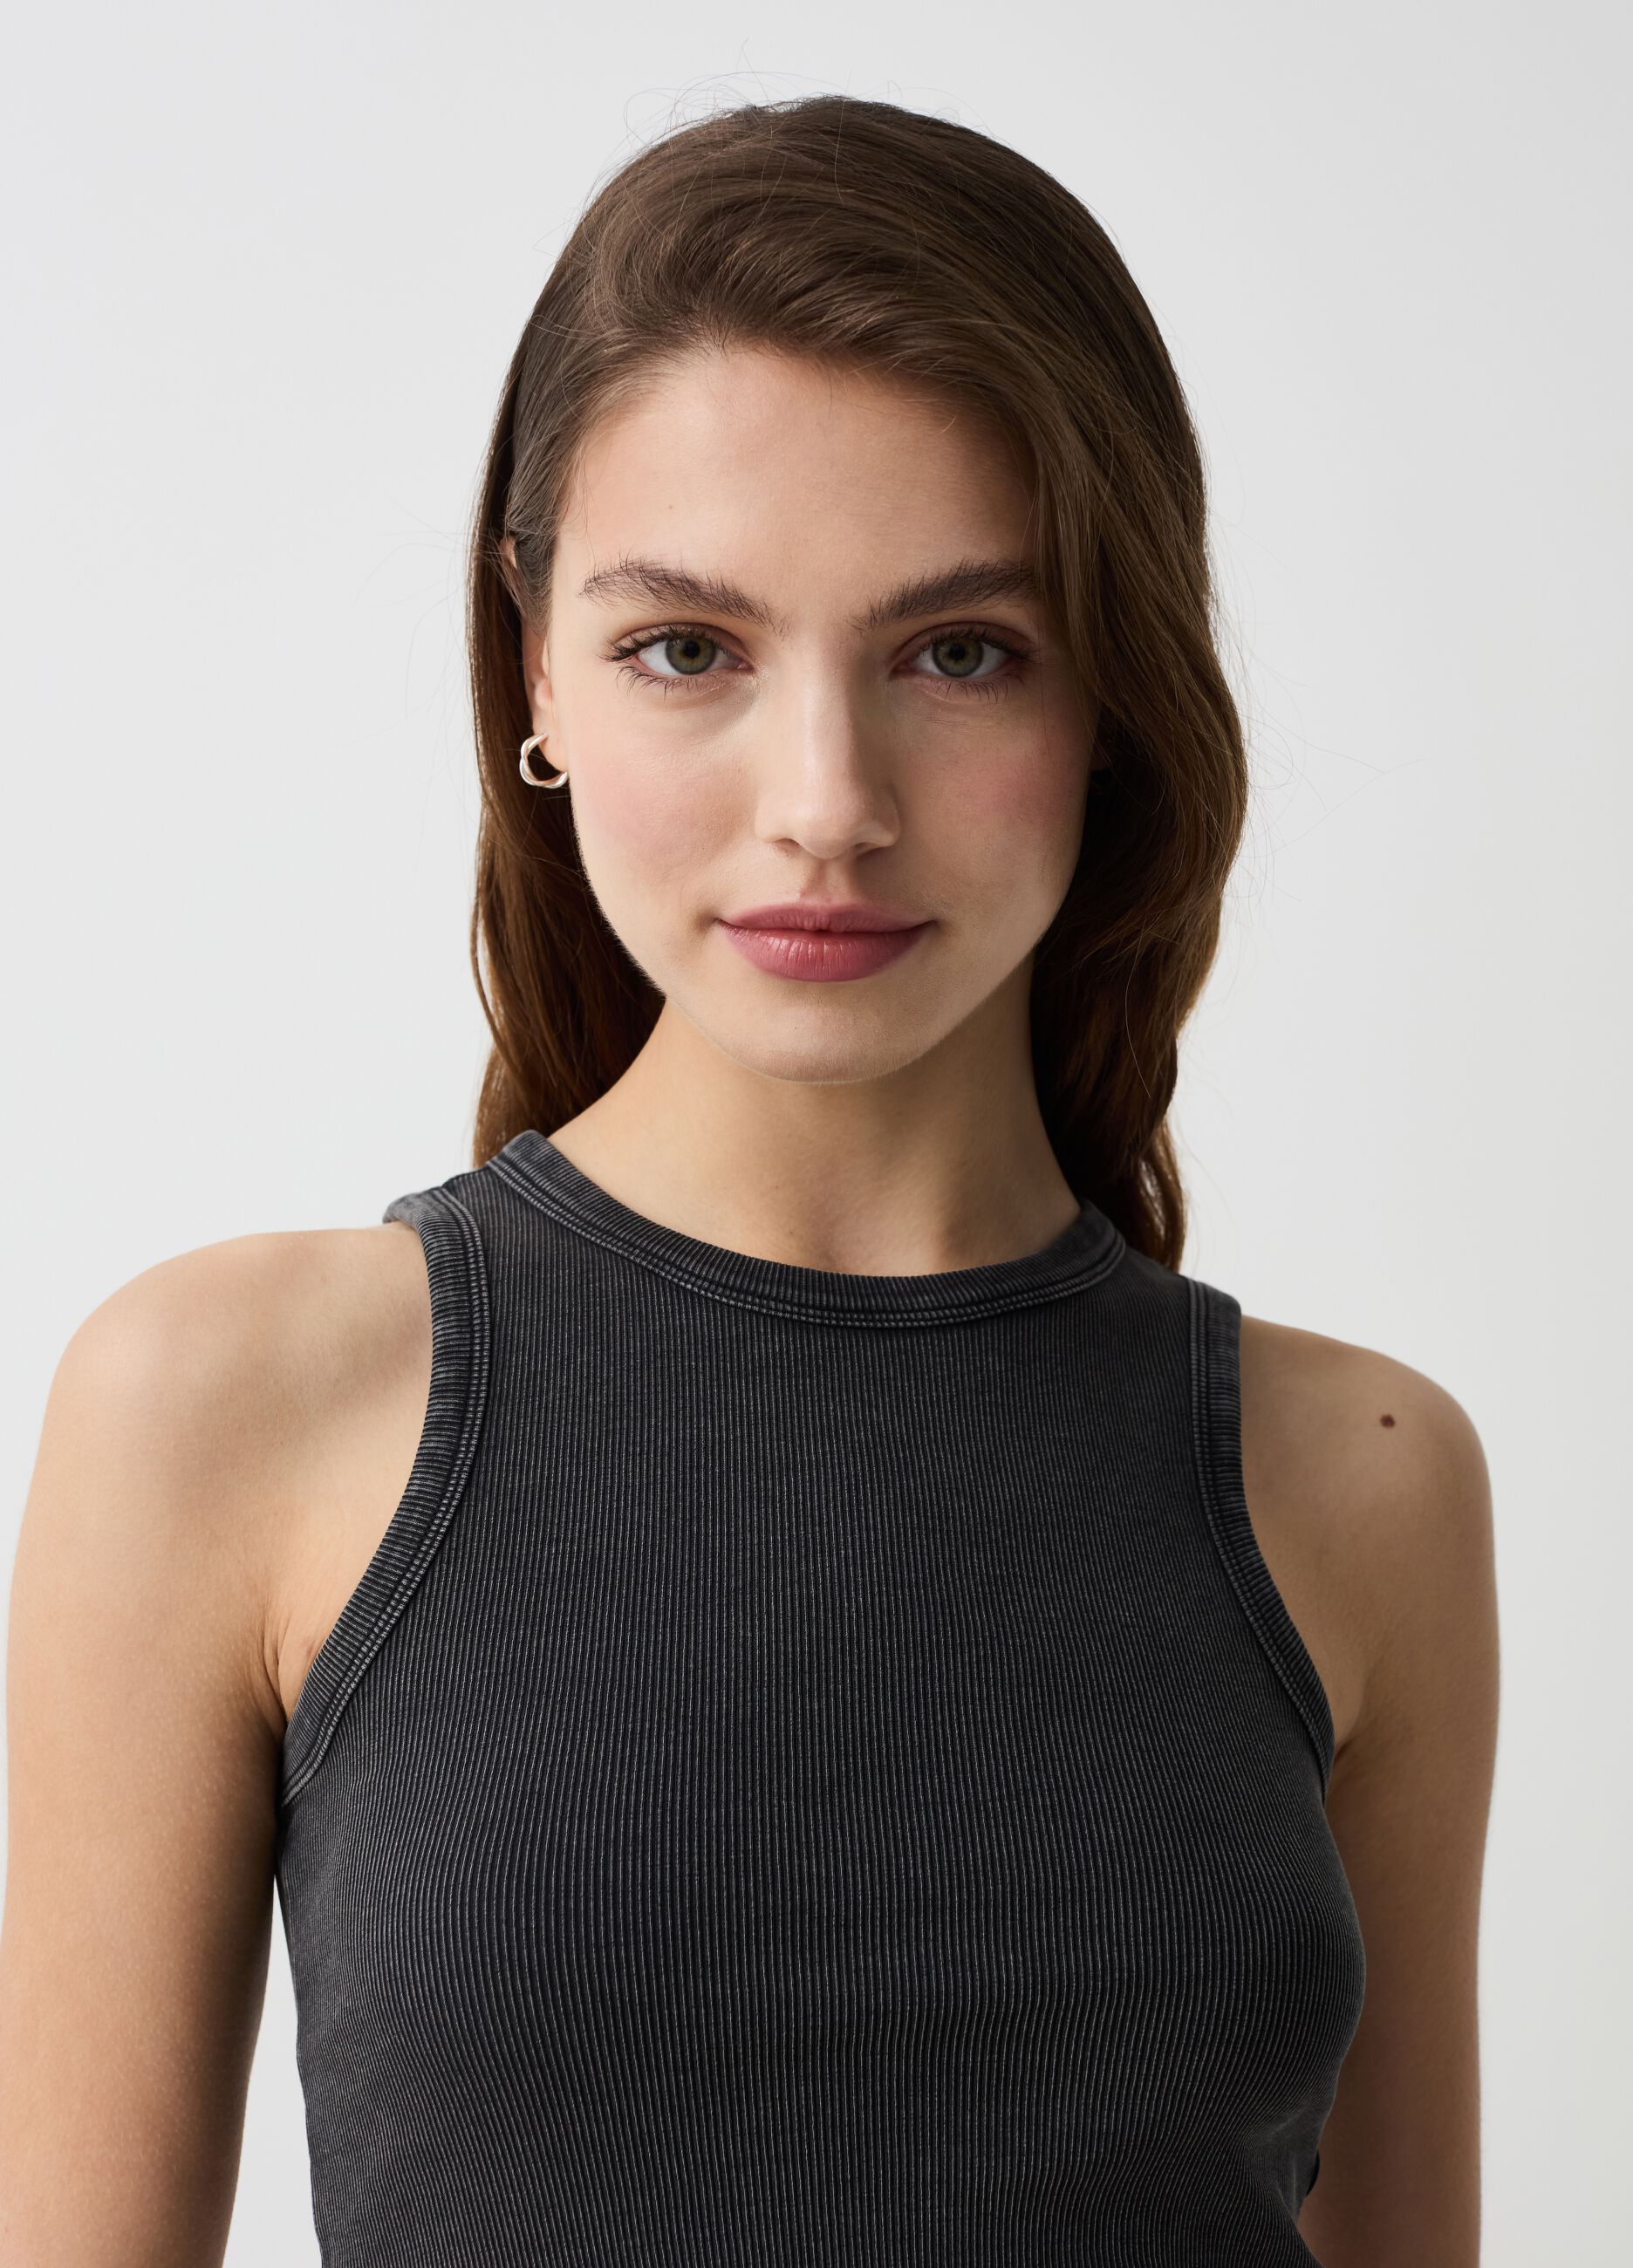 Fine-ribbed tank top